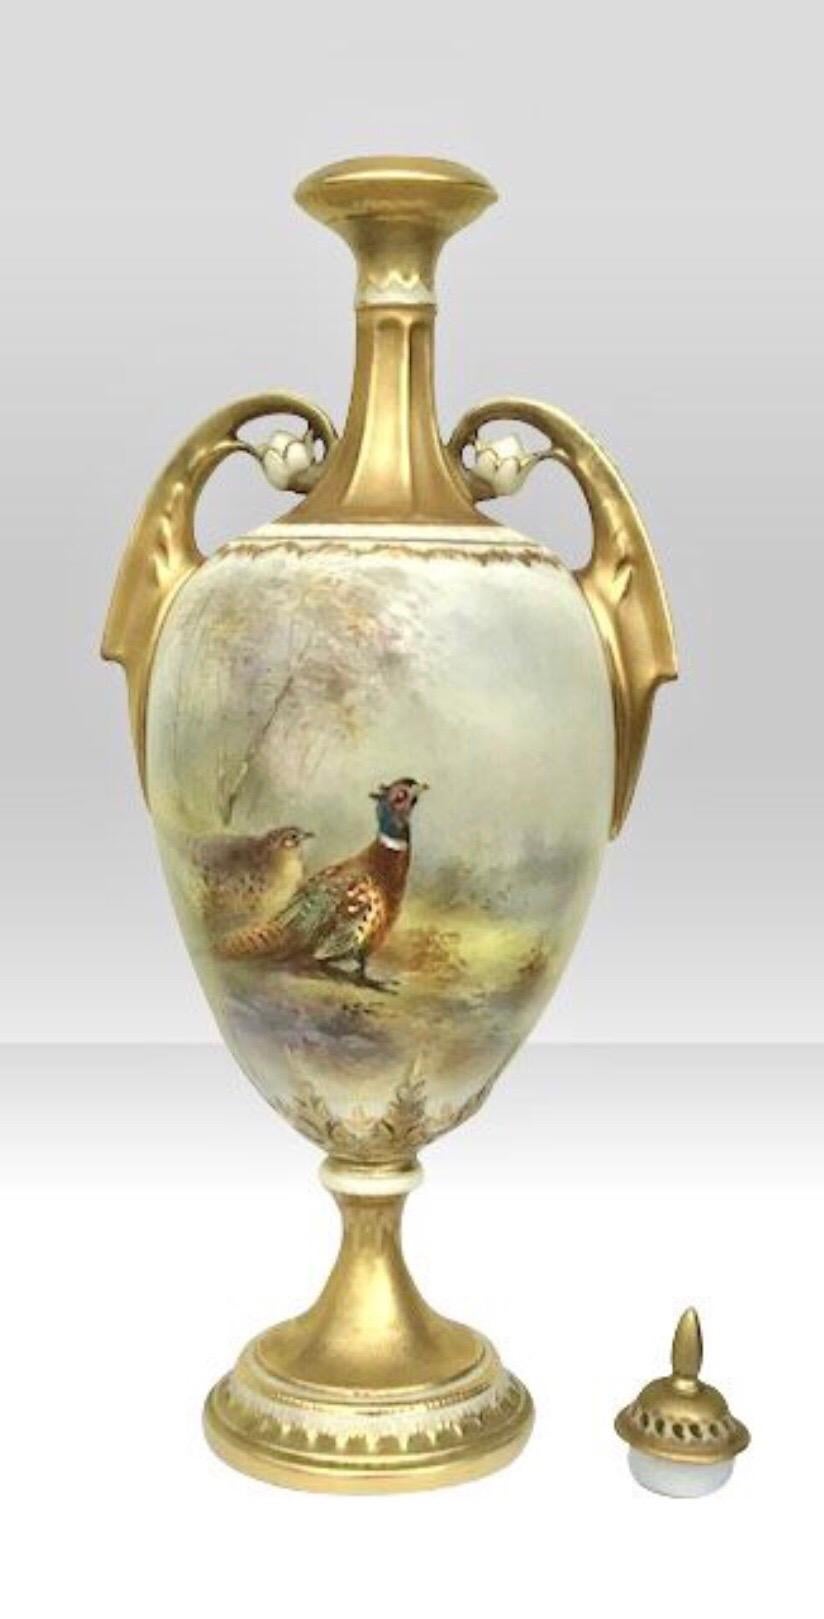 Royal Worcester antique James Stinton vase with cover.
Cock and Hen Pheasant in Wooded Glade.
Dated 1921
Measures: 32.5cm x 13cm x 10cm deep.